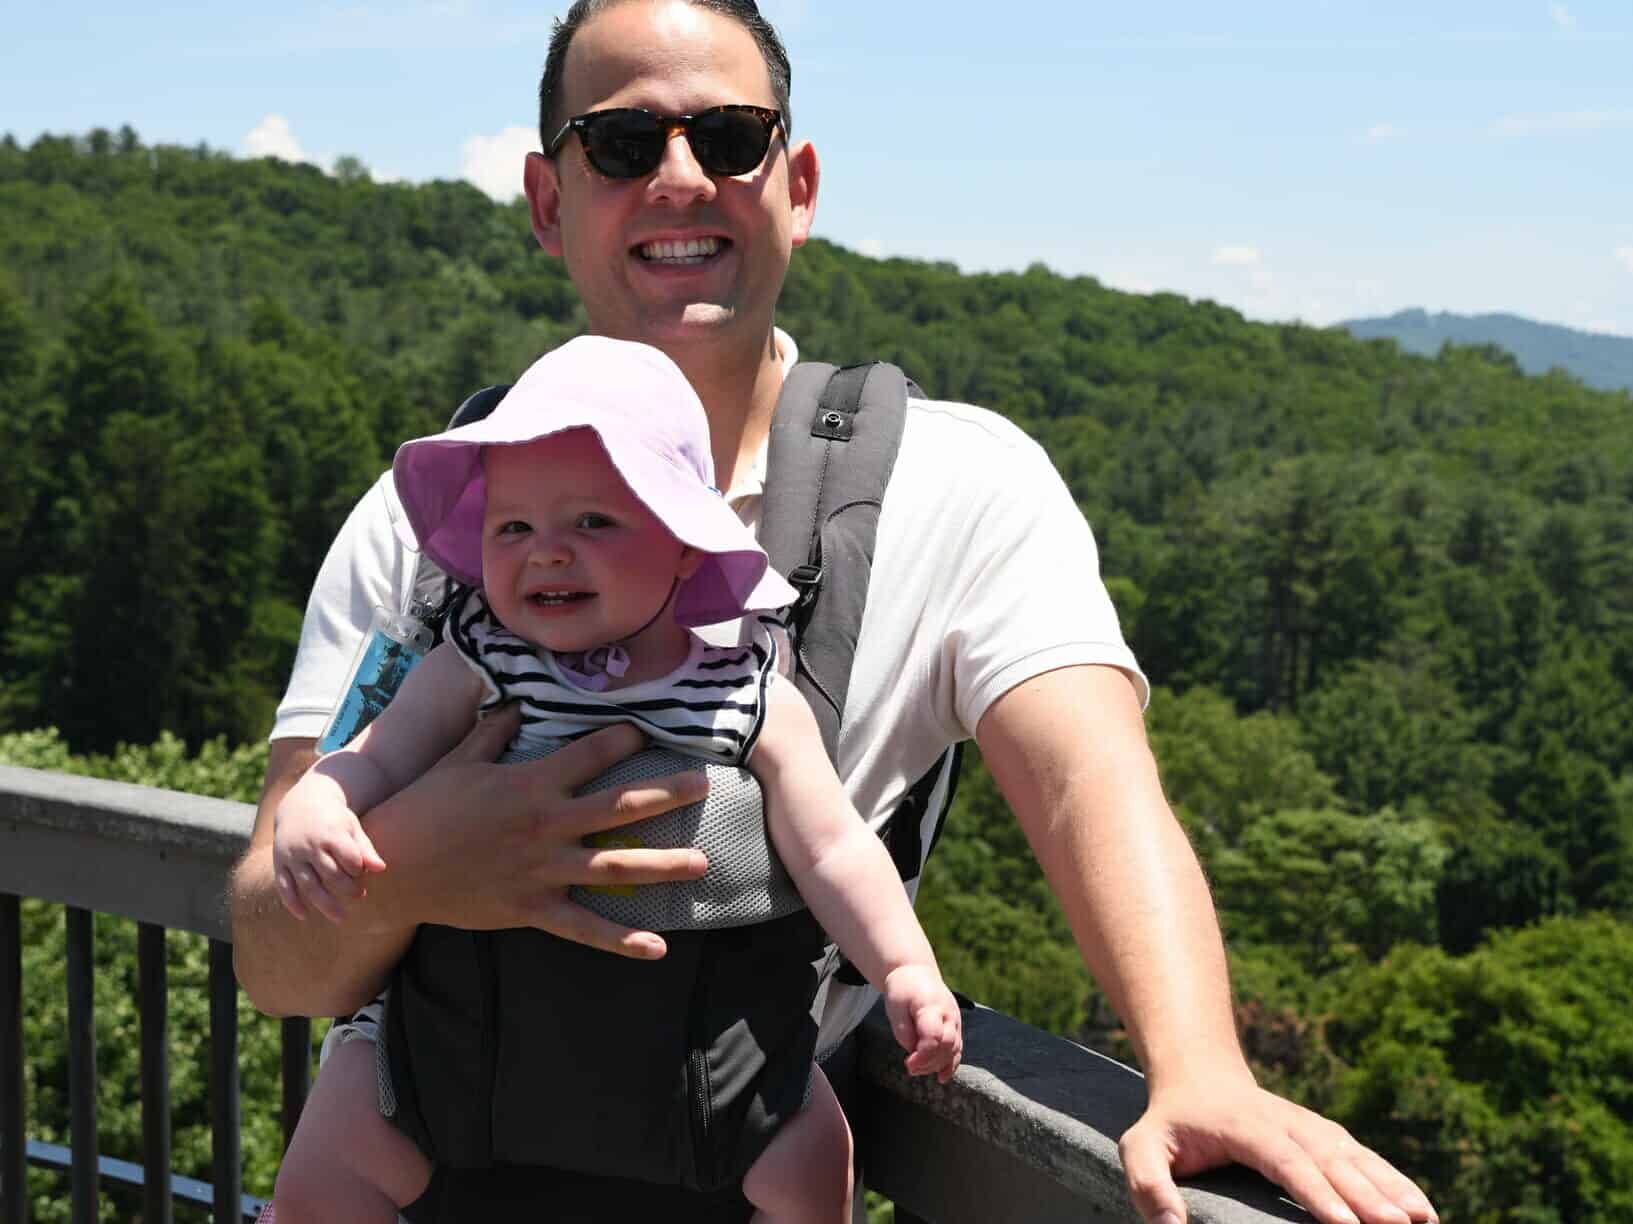 There is no stylish way to carry a baby carrier - just suck it up and deal with it